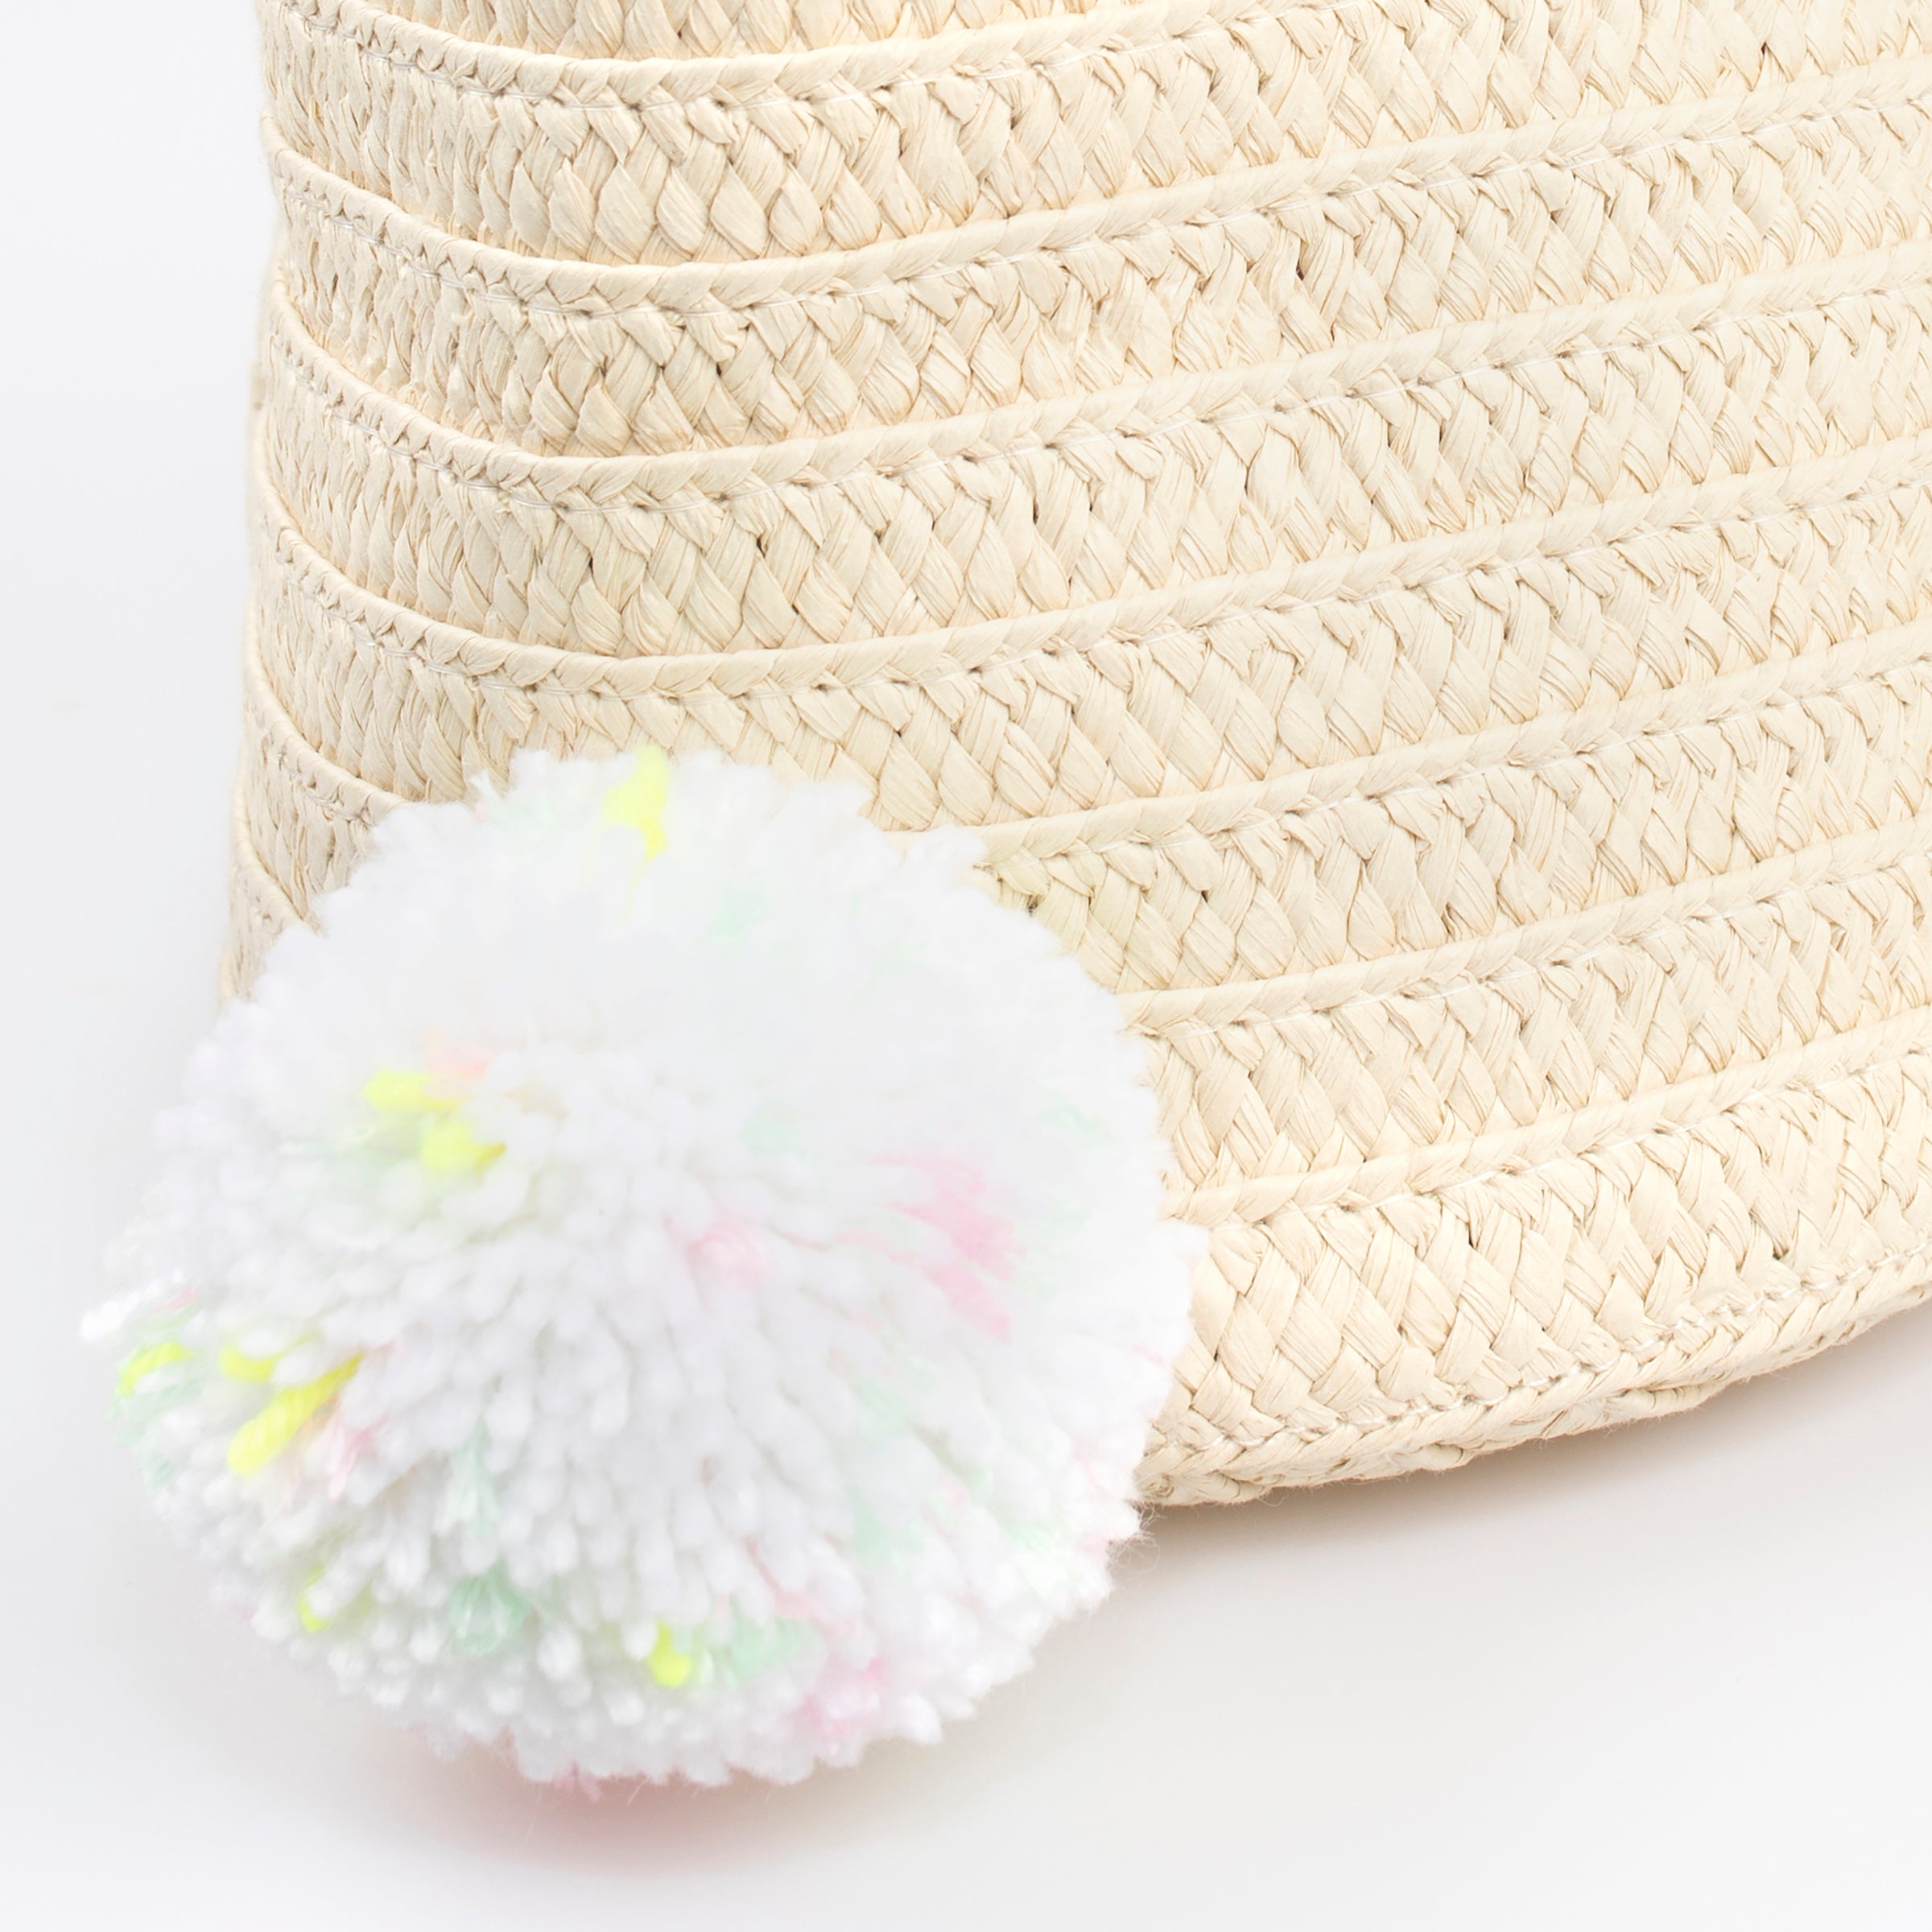 Our Easter bunny basket has a cute face, floppy ears and a pompom tail.